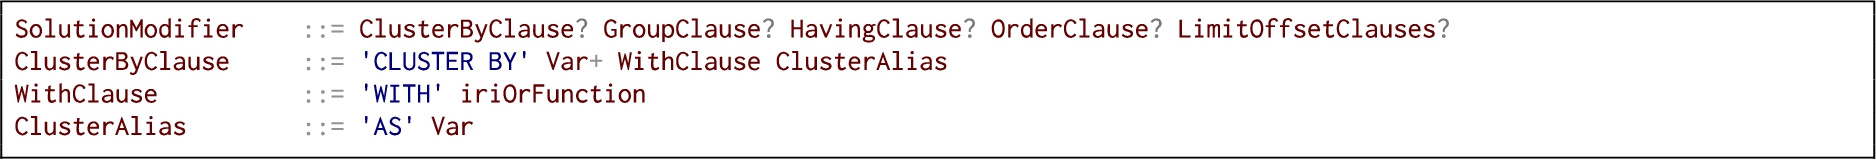 Syntactic extension to the SPARQL 1.1 grammar for clustering.